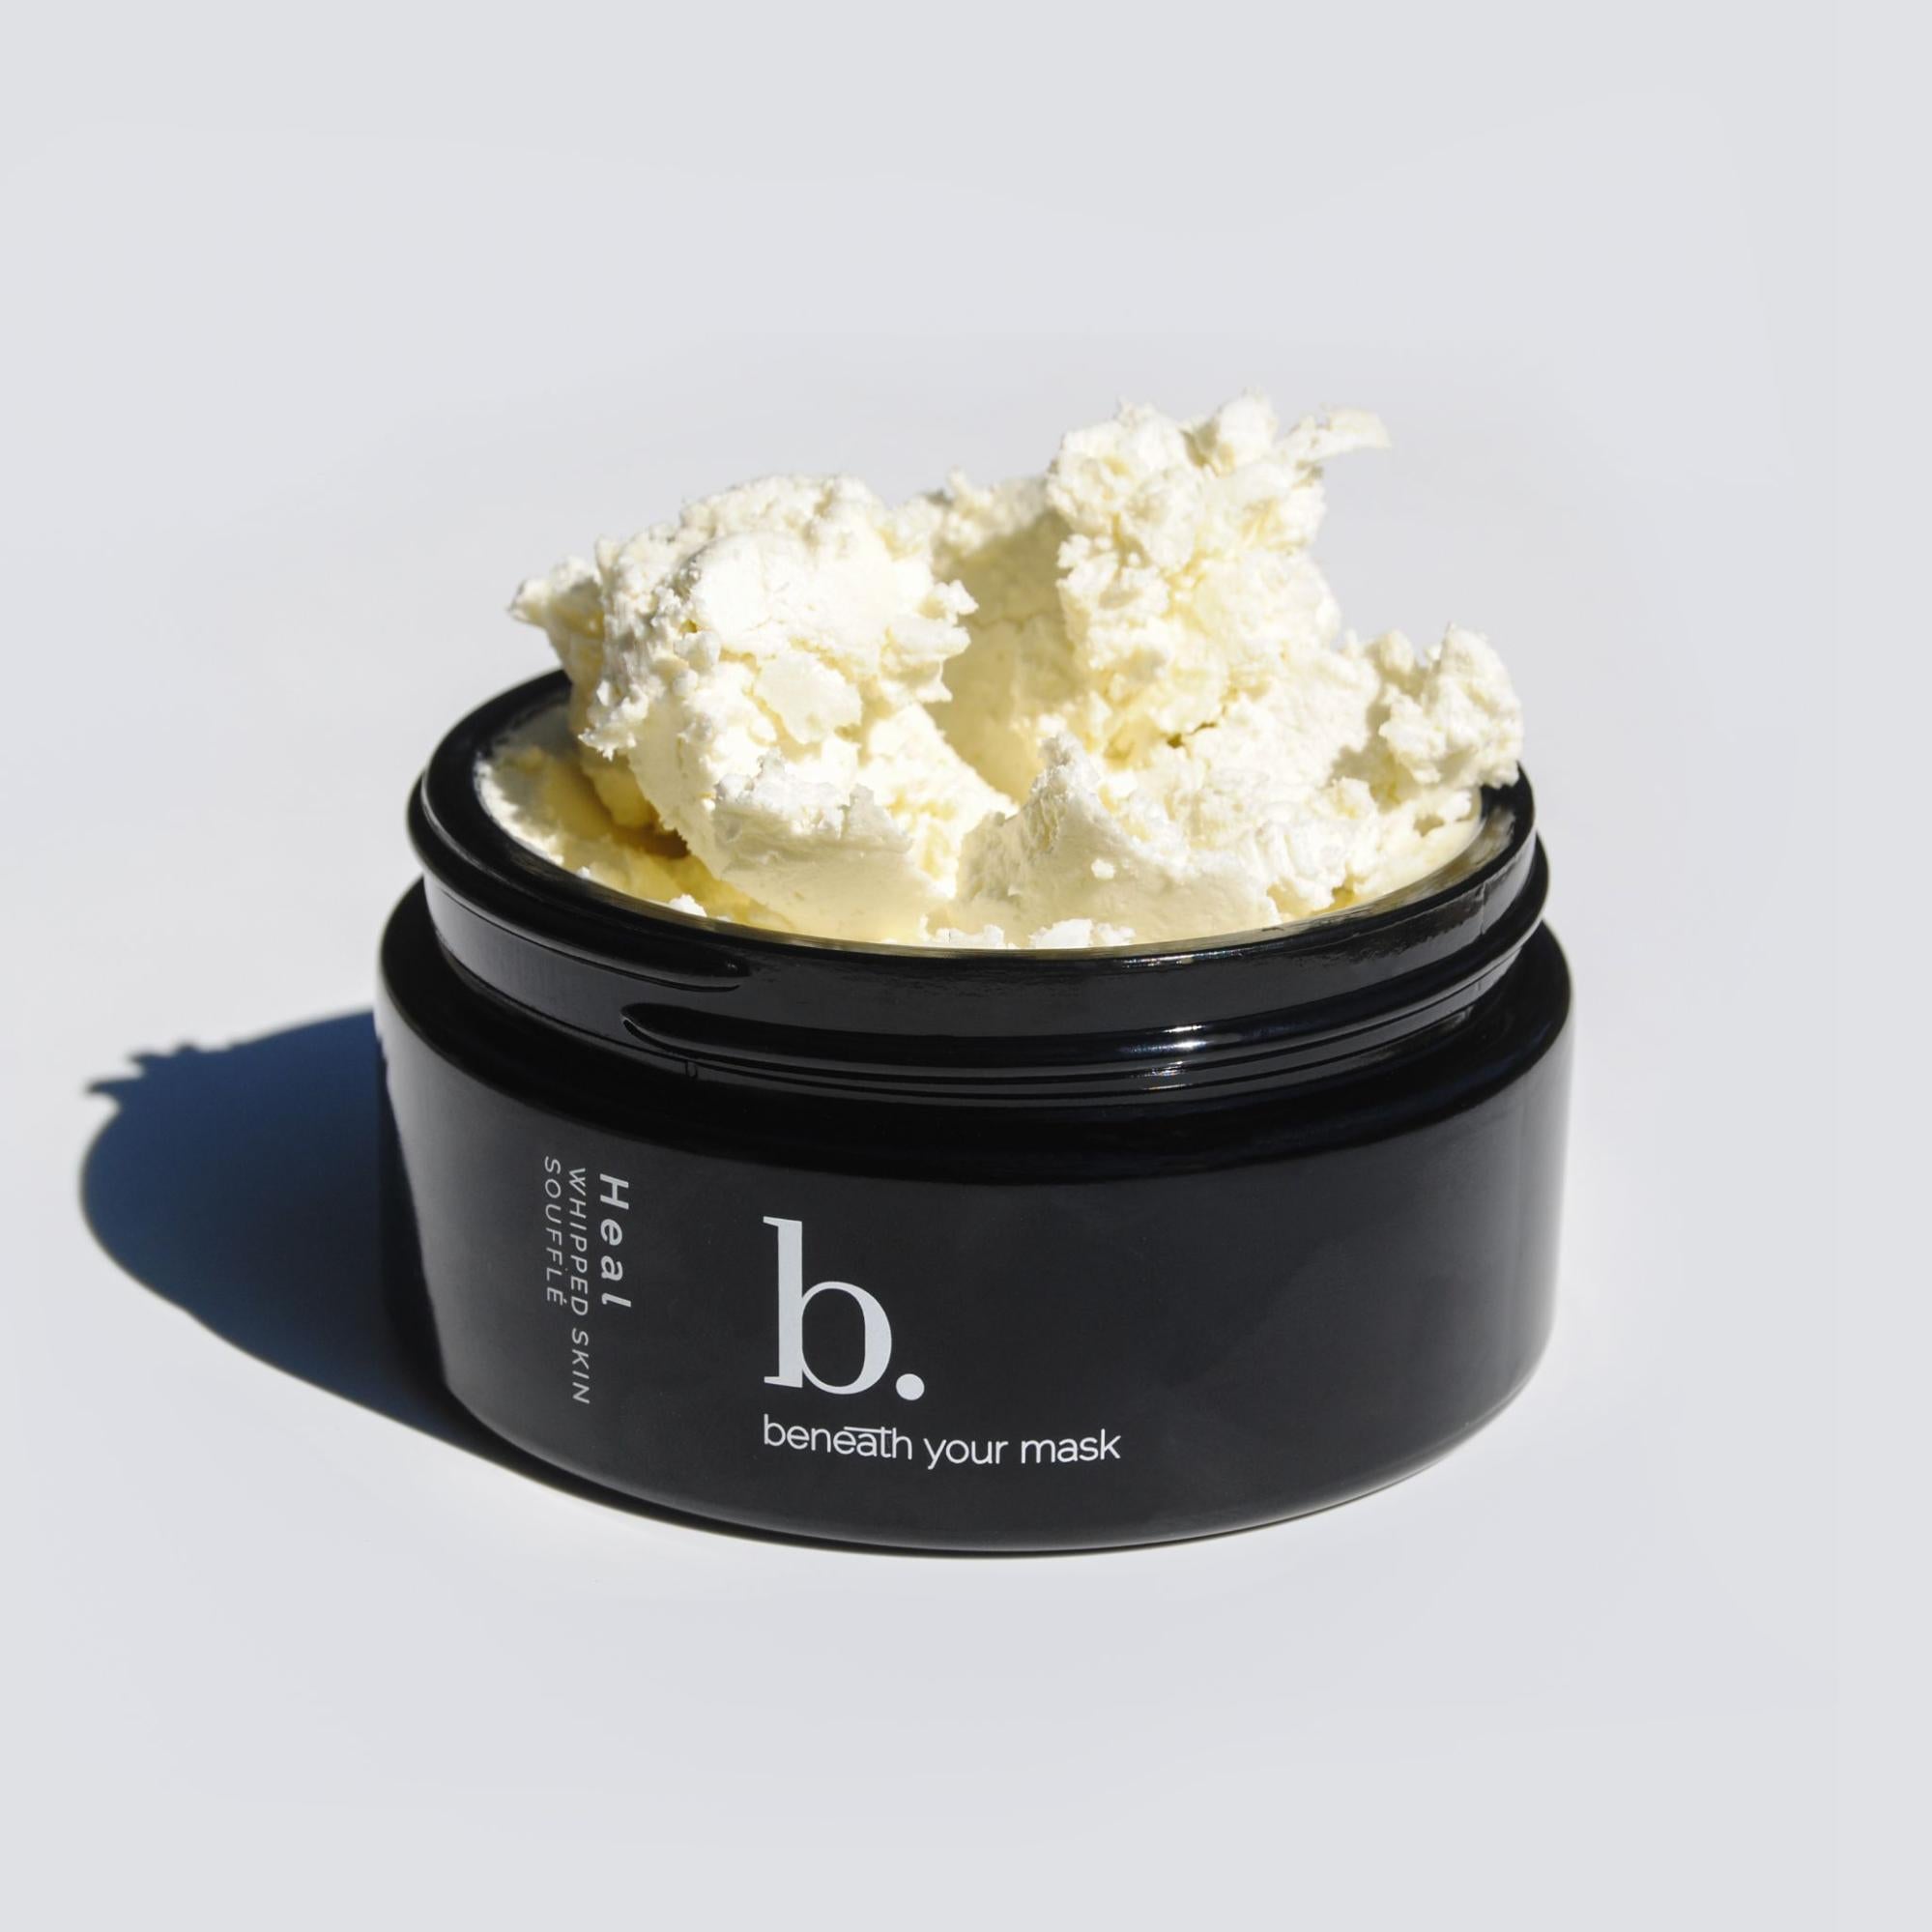 A container of whipped body butter from Beneath Your Mask.